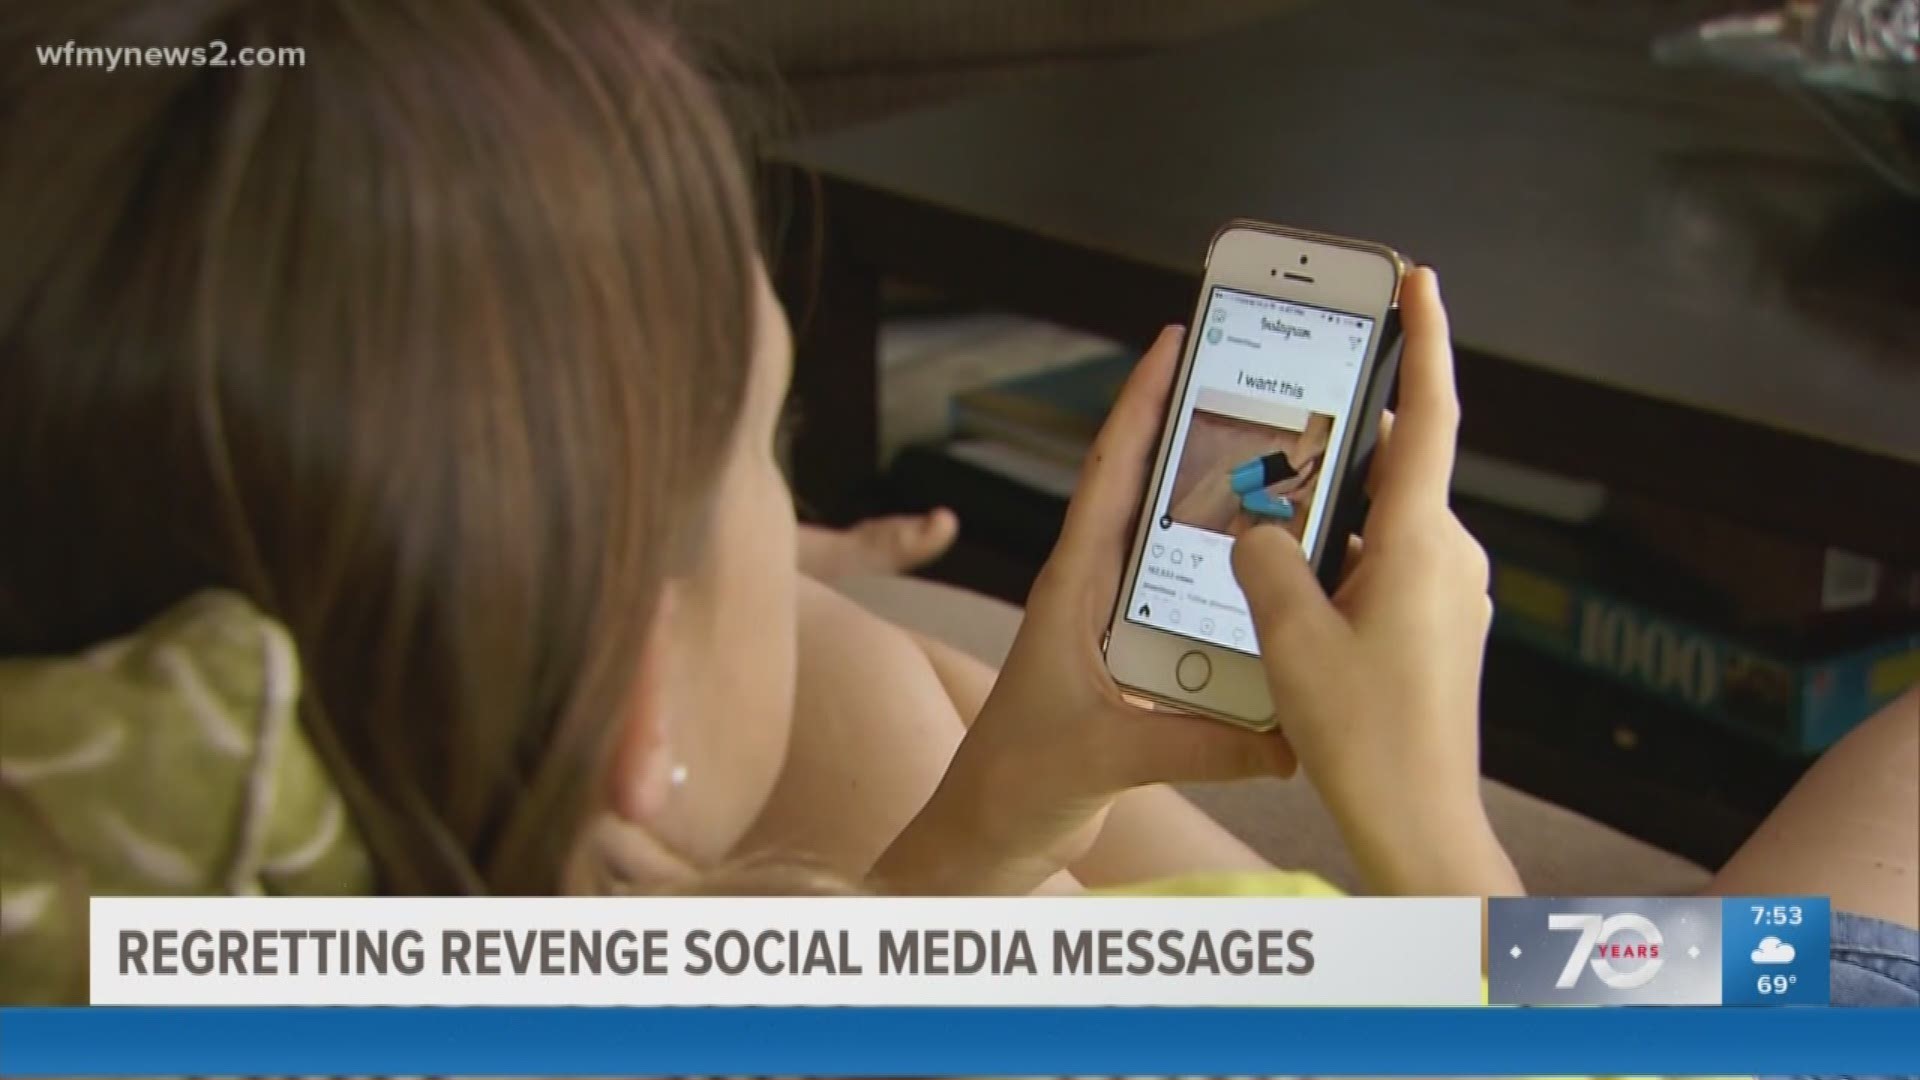 Being on social media isn't easy when you're bombarded with hateful comments. Blanca Cobb
shares tips to avoid your angry responses.